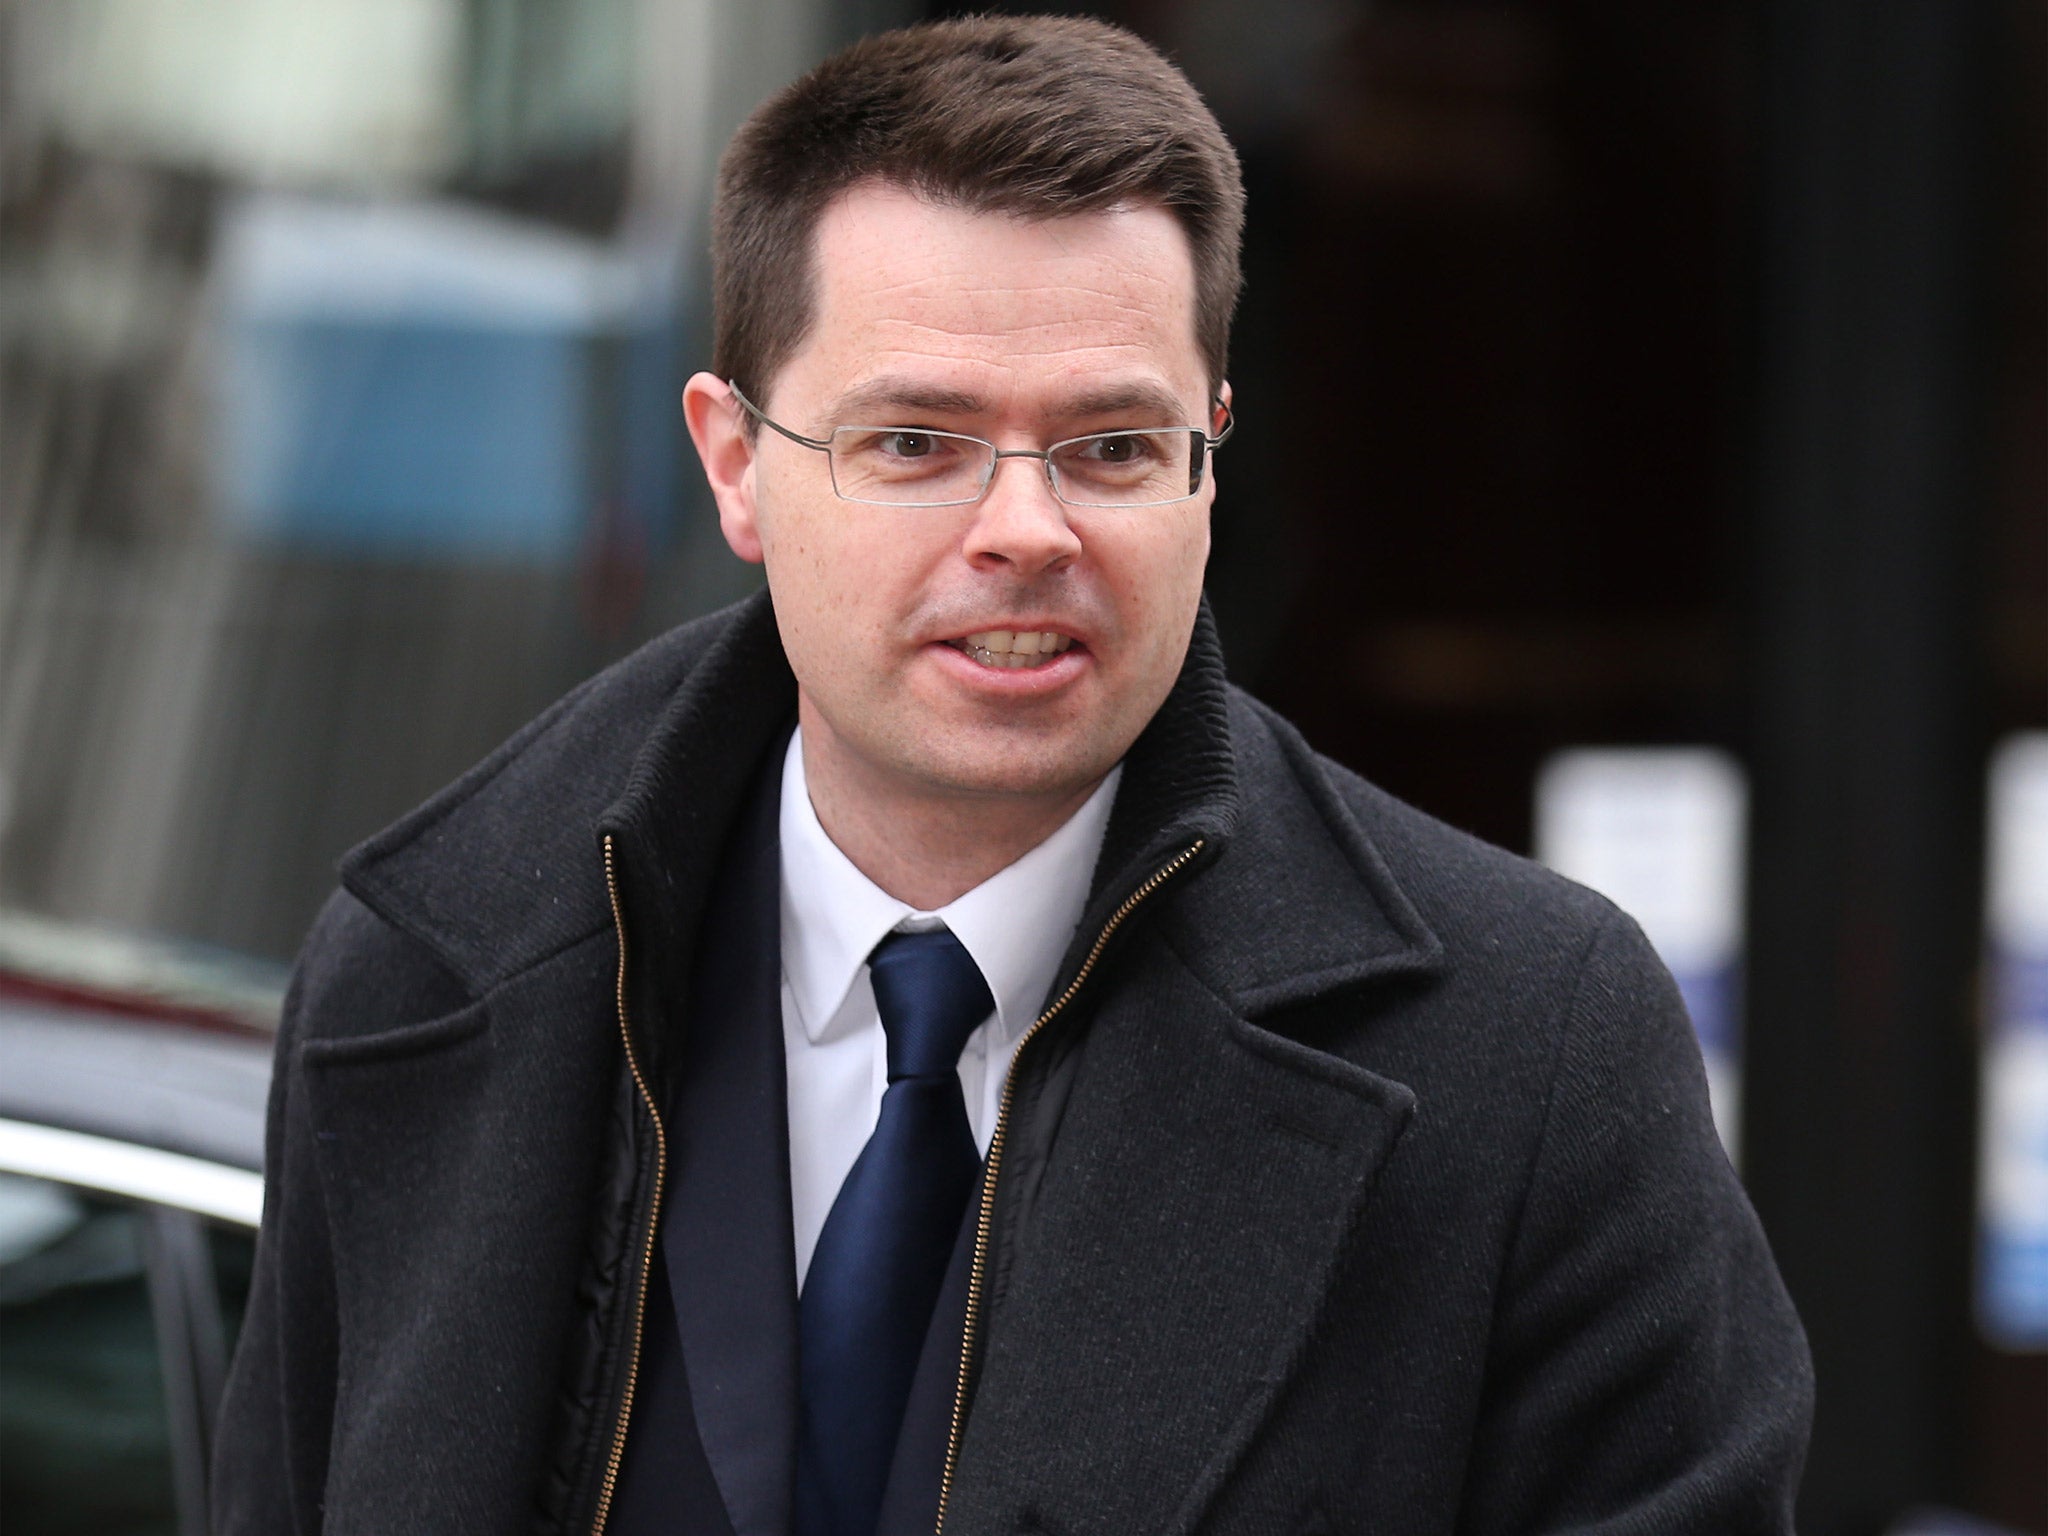 James Brokenshire says UK will remain a ‘global leader on security’